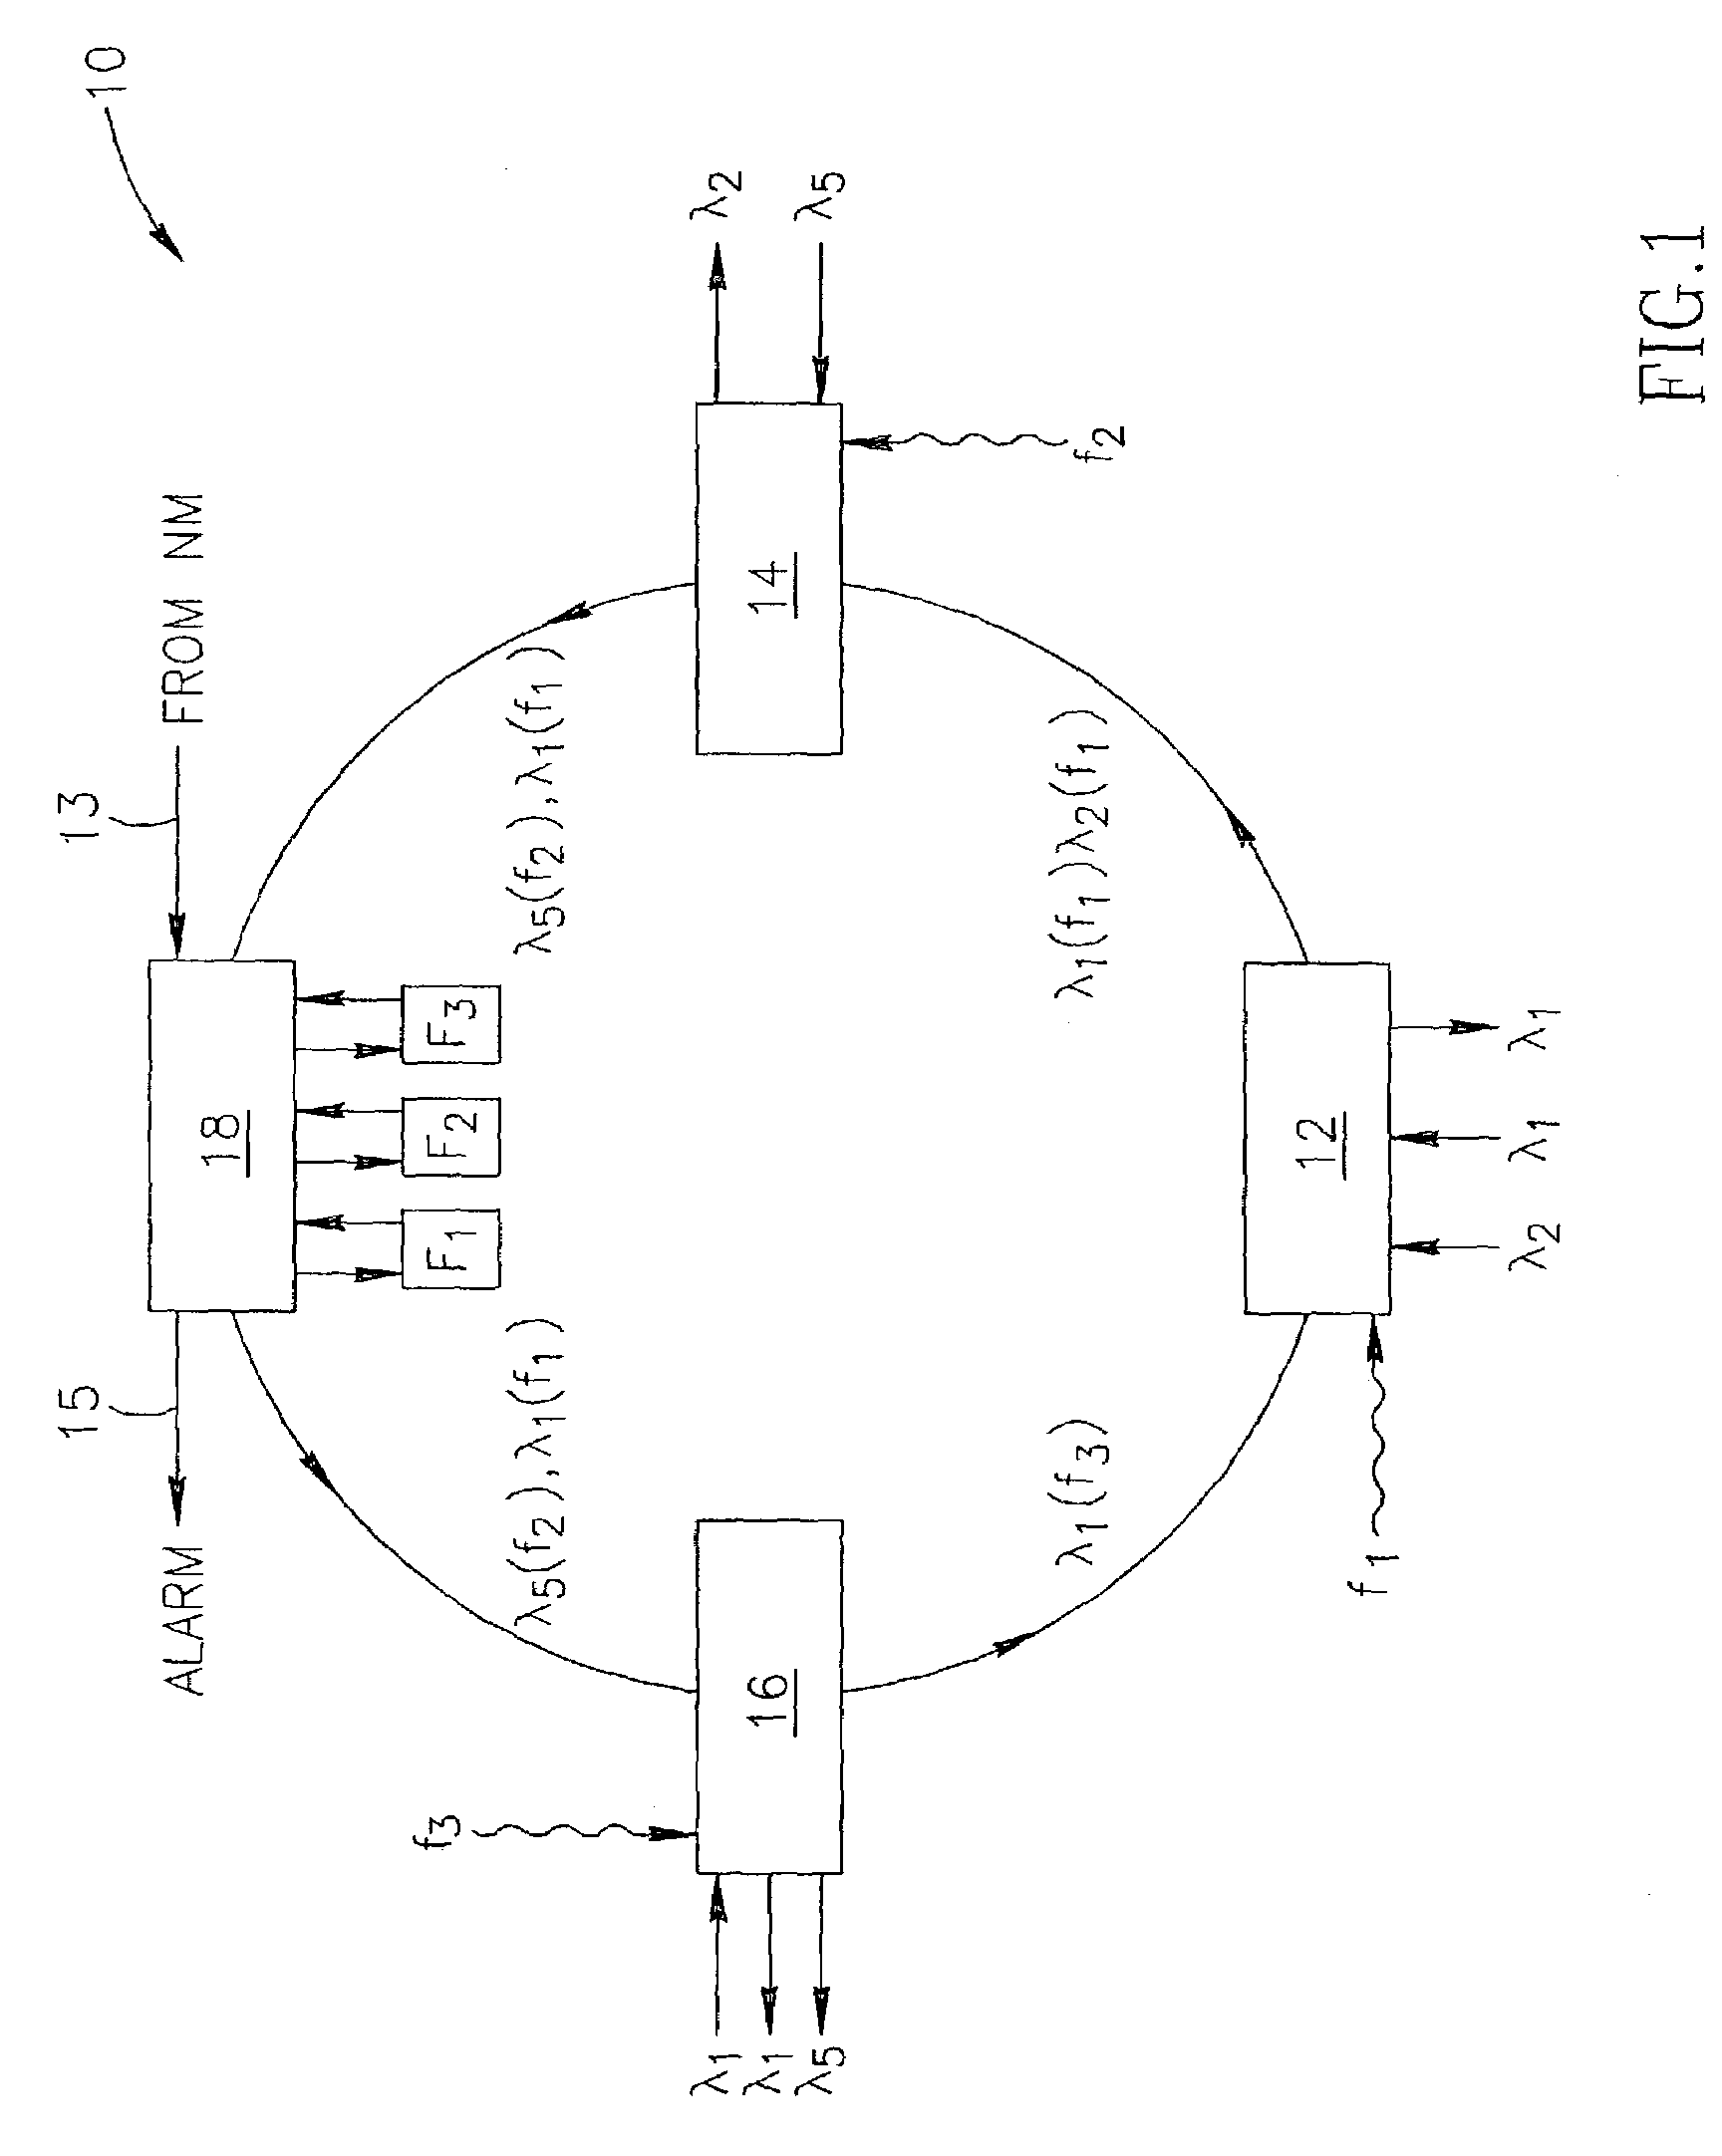 Method of locating faults in optical telecommunication networks